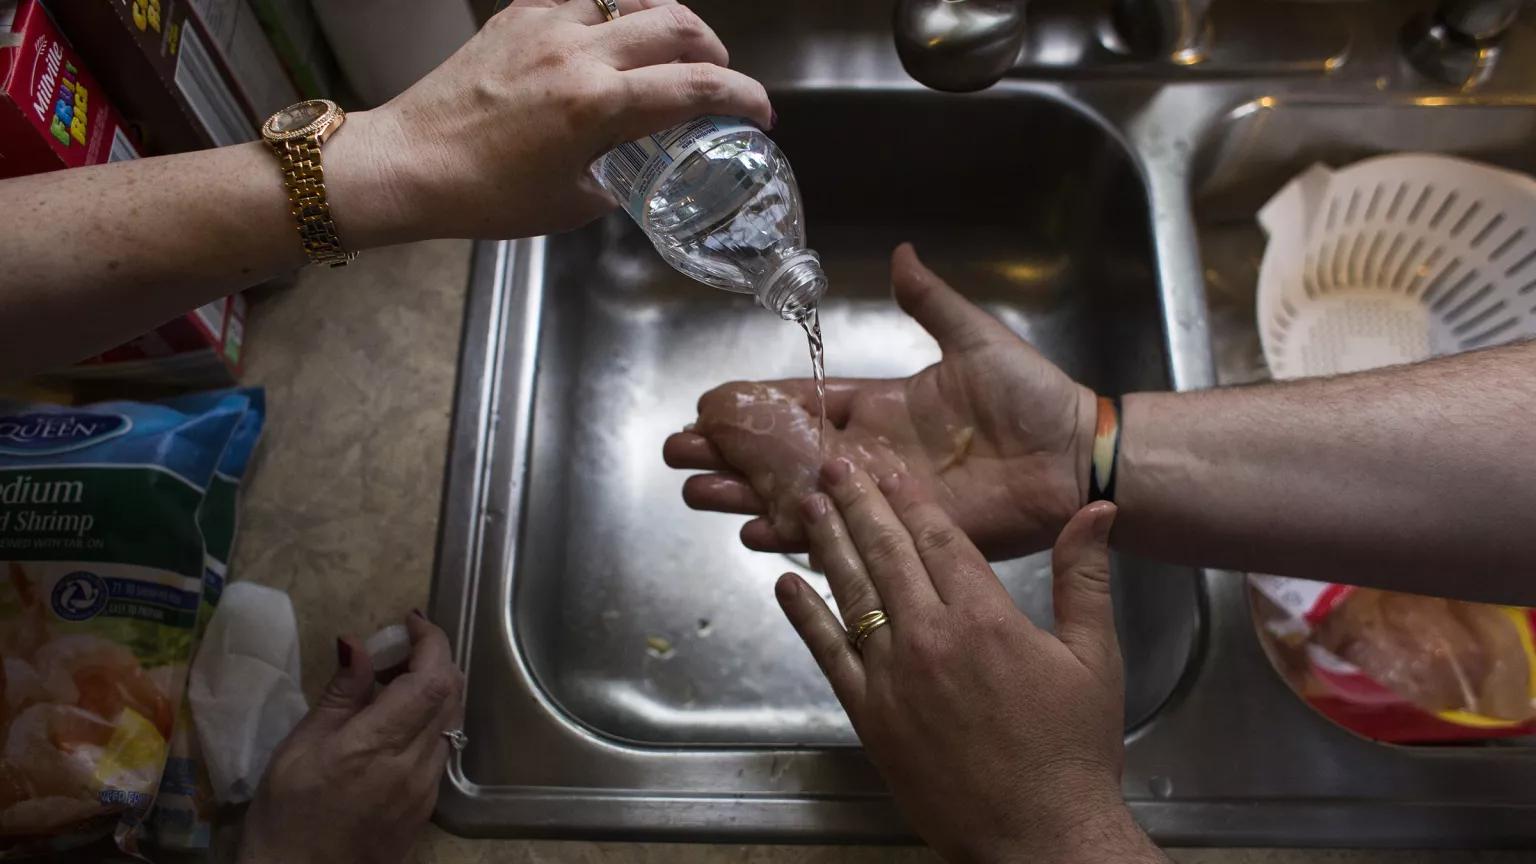 A person holds a piece of raw poultry over a kitchen sink, while another person pours bottled water over it.